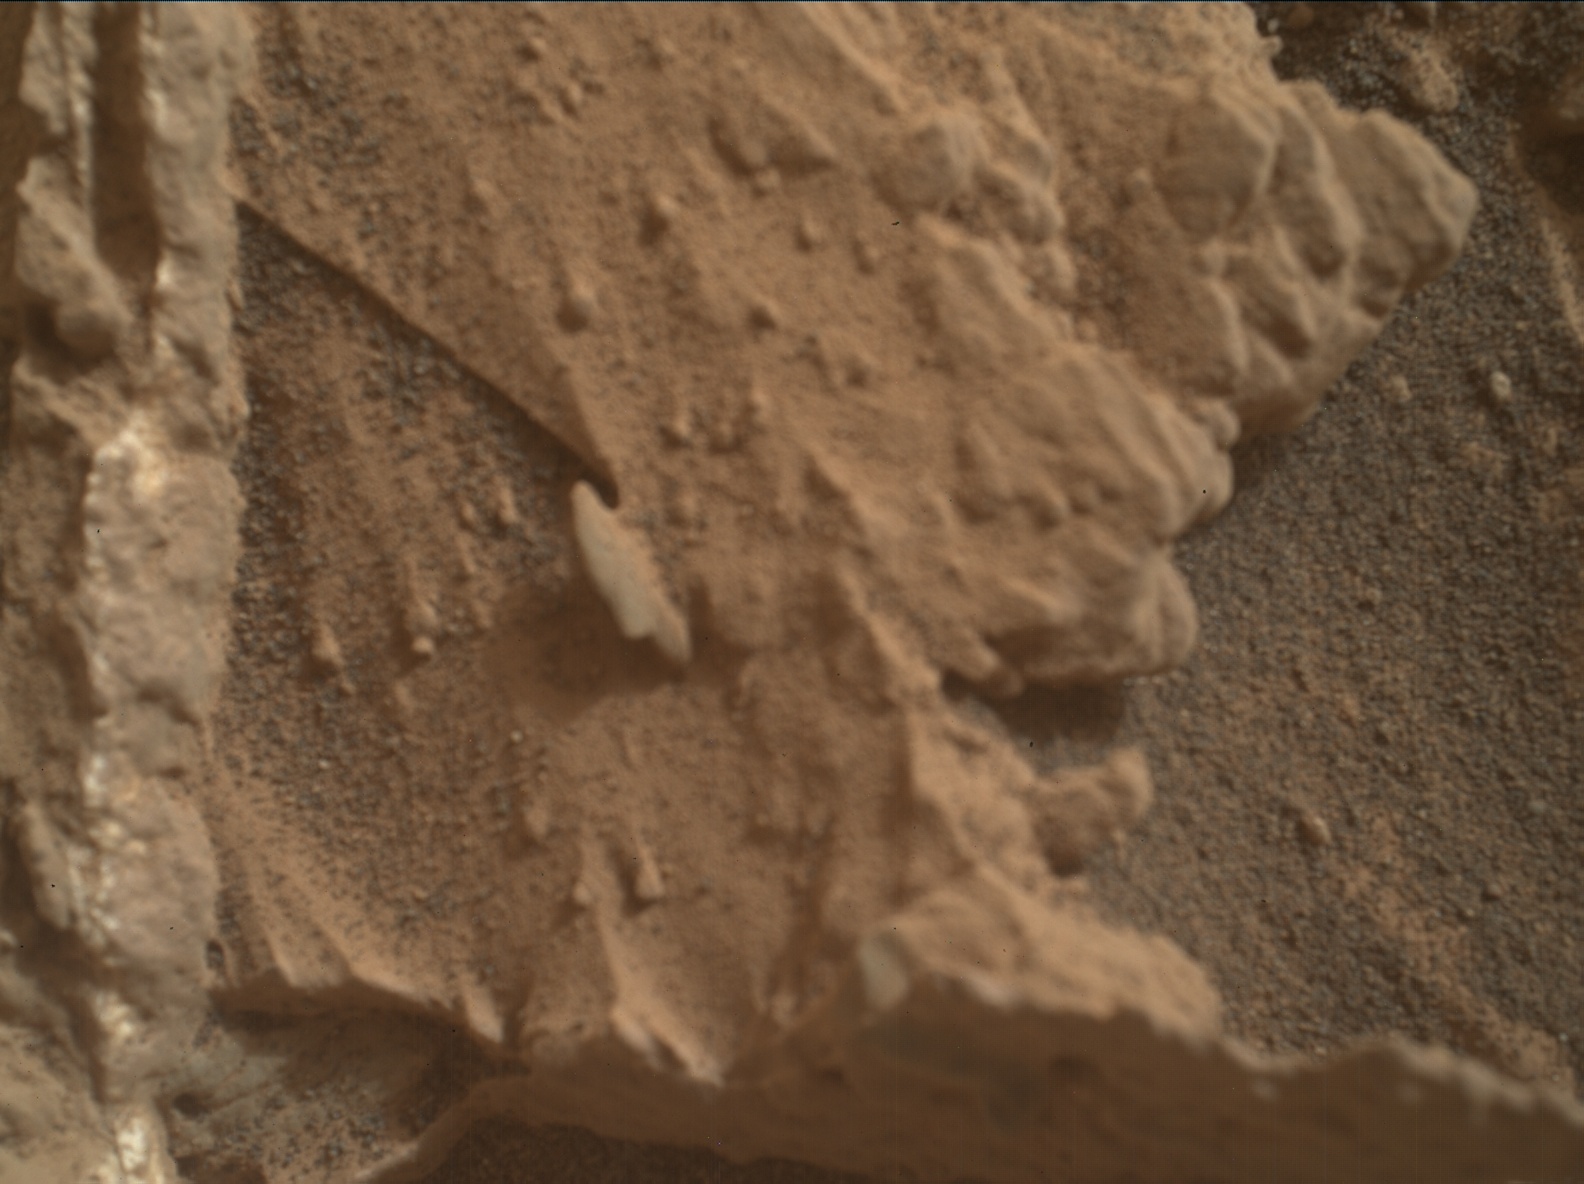 Nasa's Mars rover Curiosity acquired this image using its Mars Hand Lens Imager (MAHLI) on Sol 3503